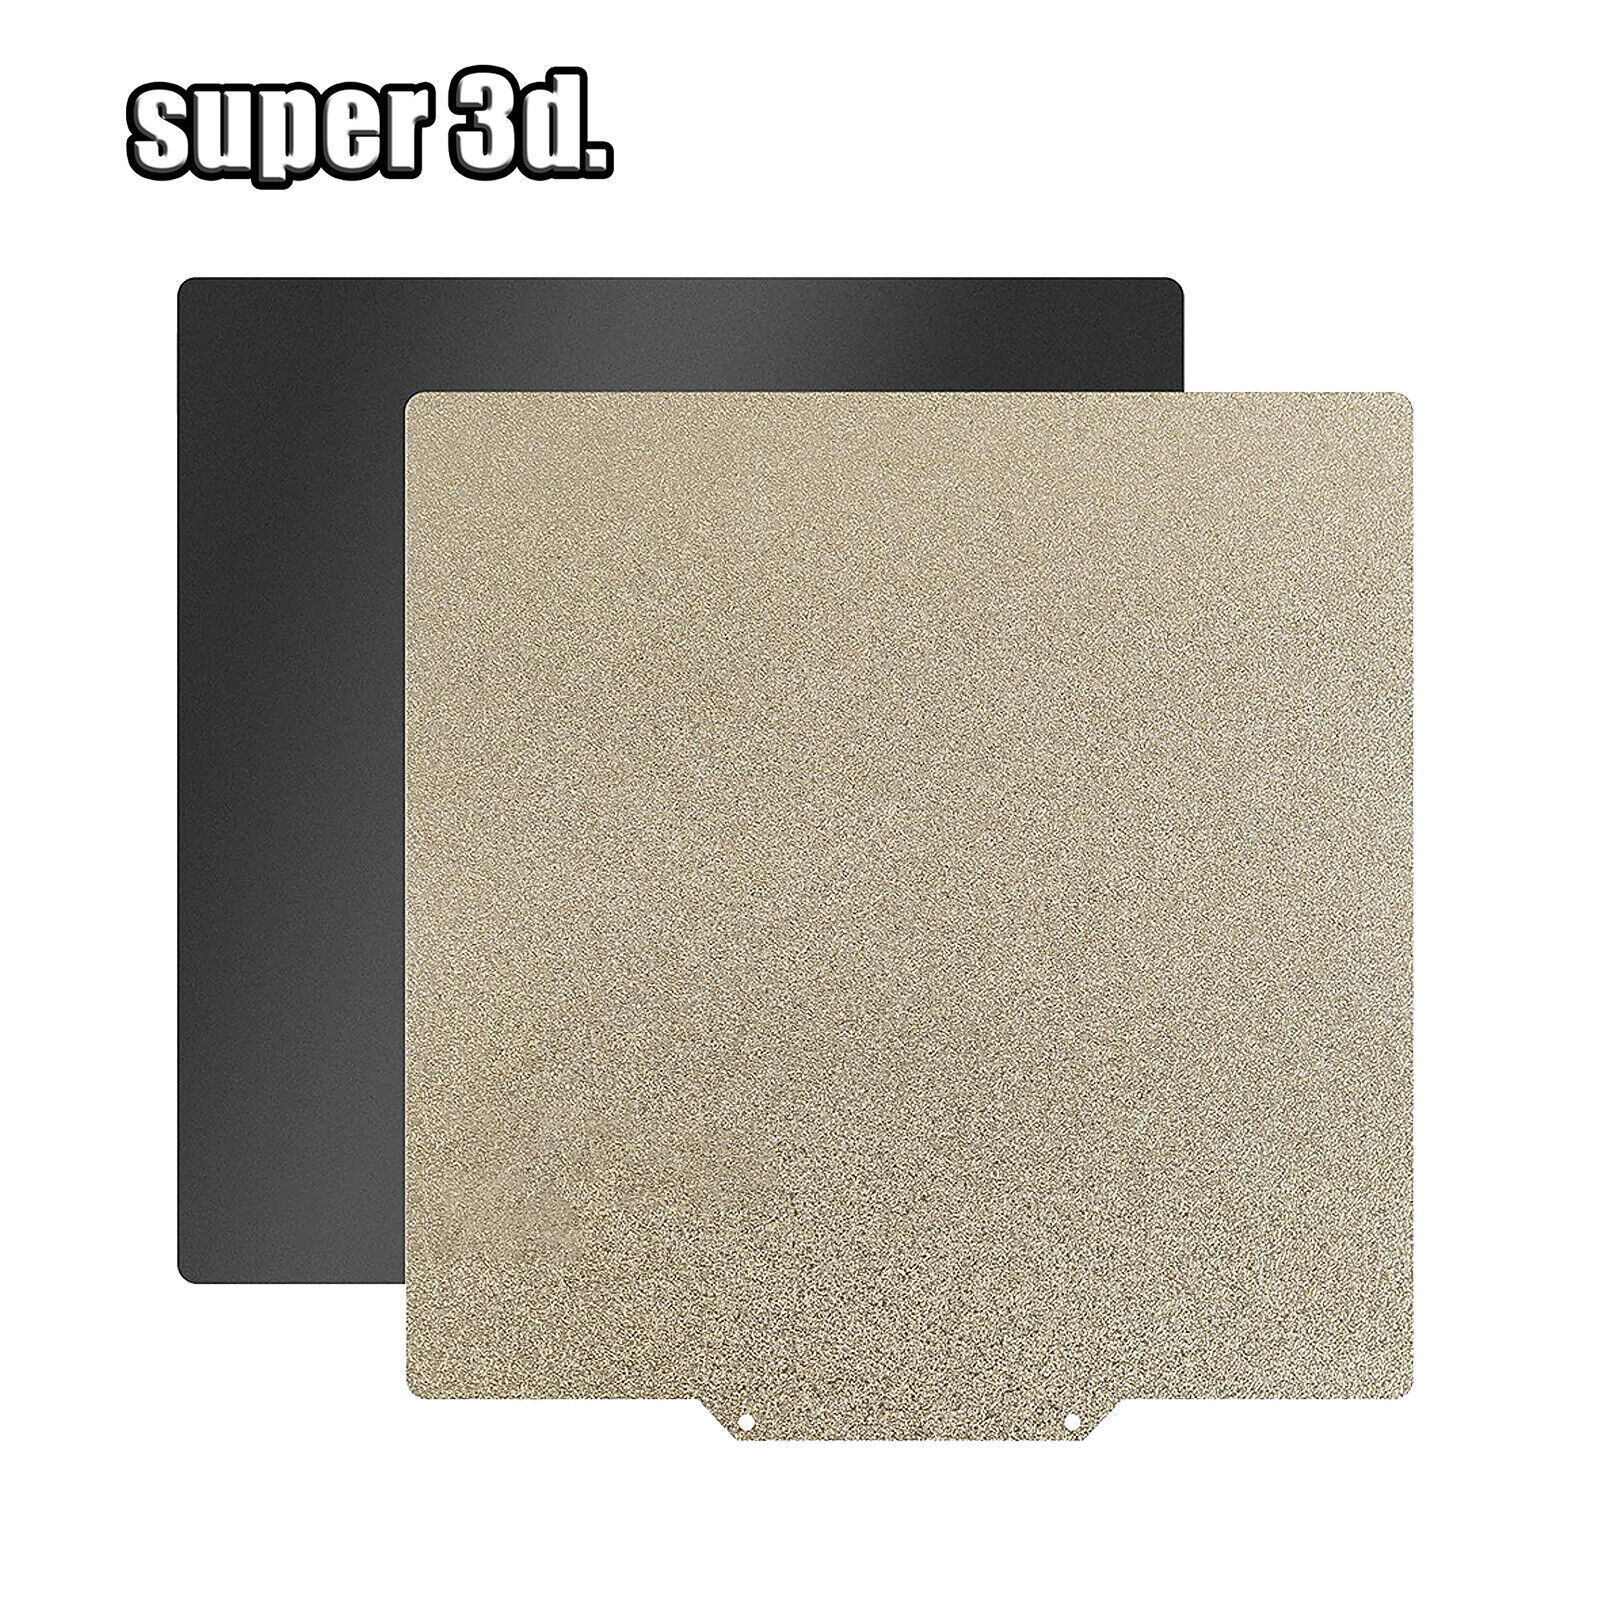 Textured PEI Steel Sheet Heat Bed Double Sided Powder Coated for Ender 3/CR 10